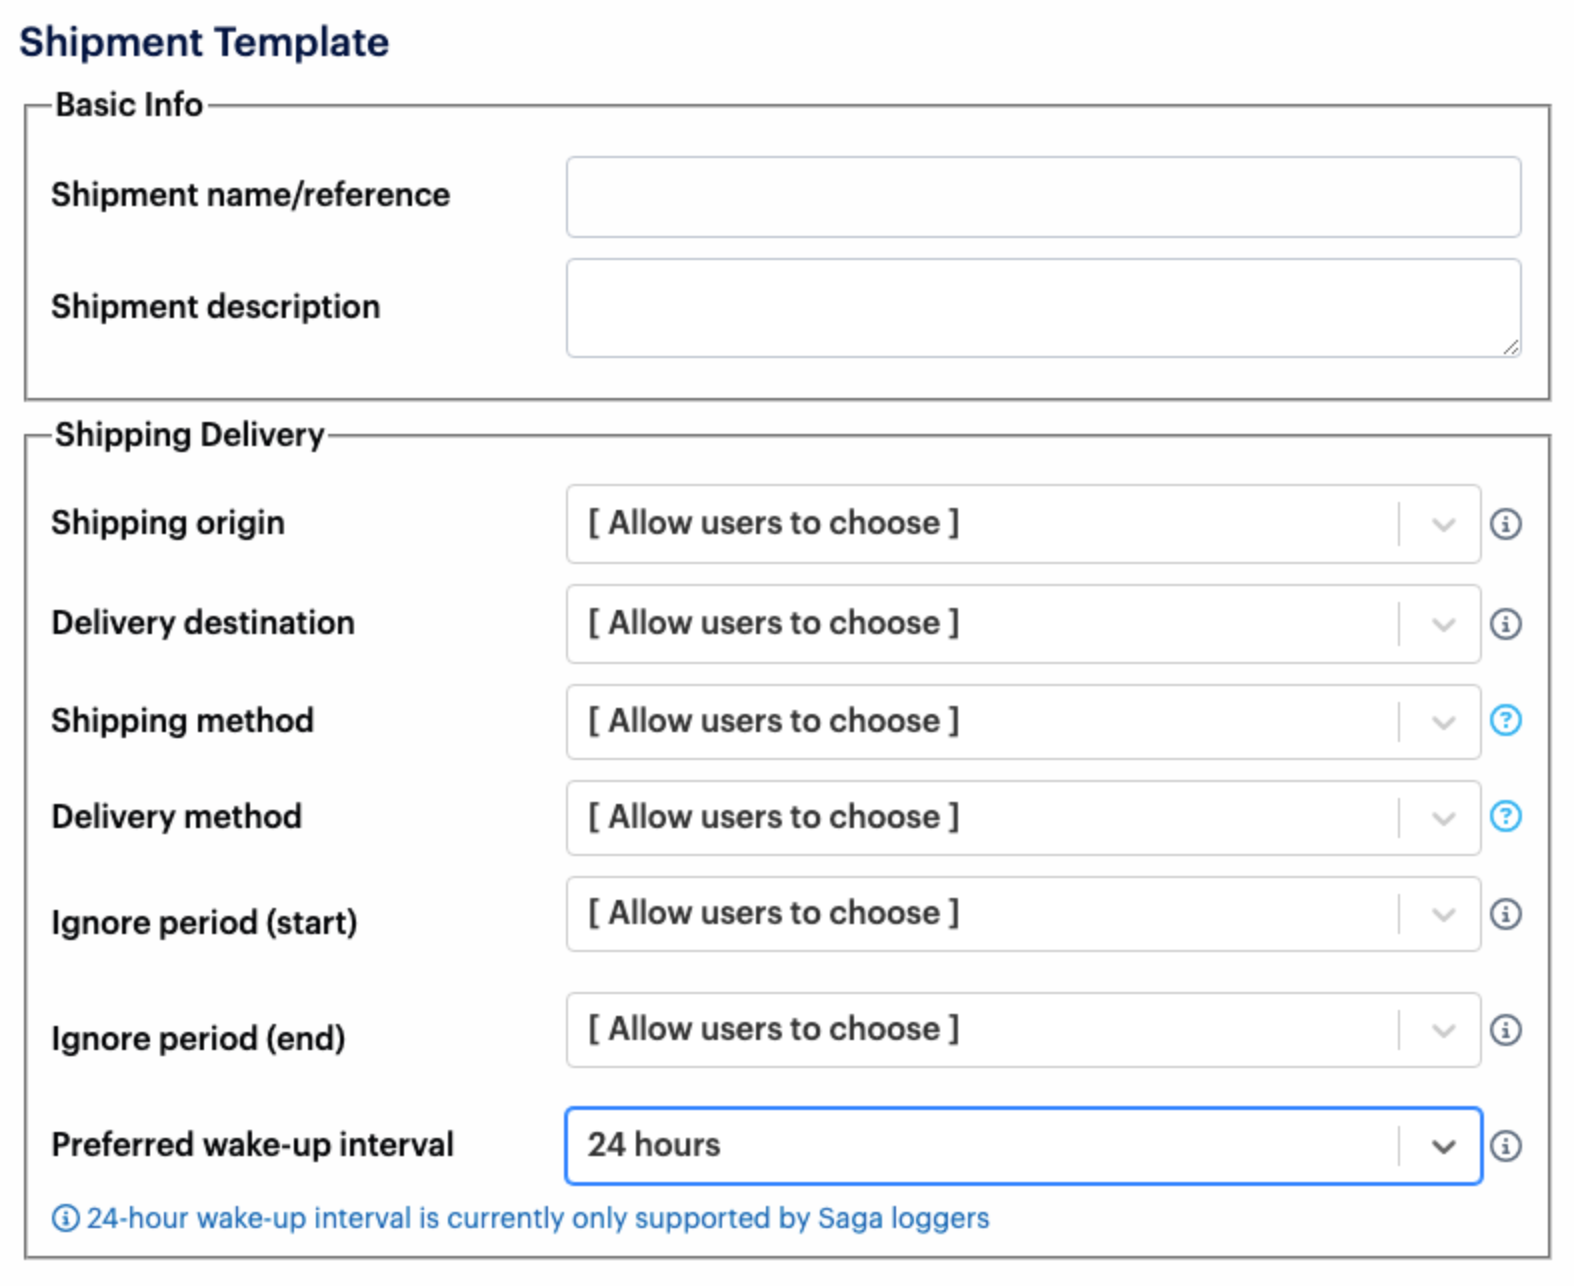 Screenshot of the Shipment Template dialog, indicating you can now set the preferred wake-up interval for Saga loggers to 24 hours